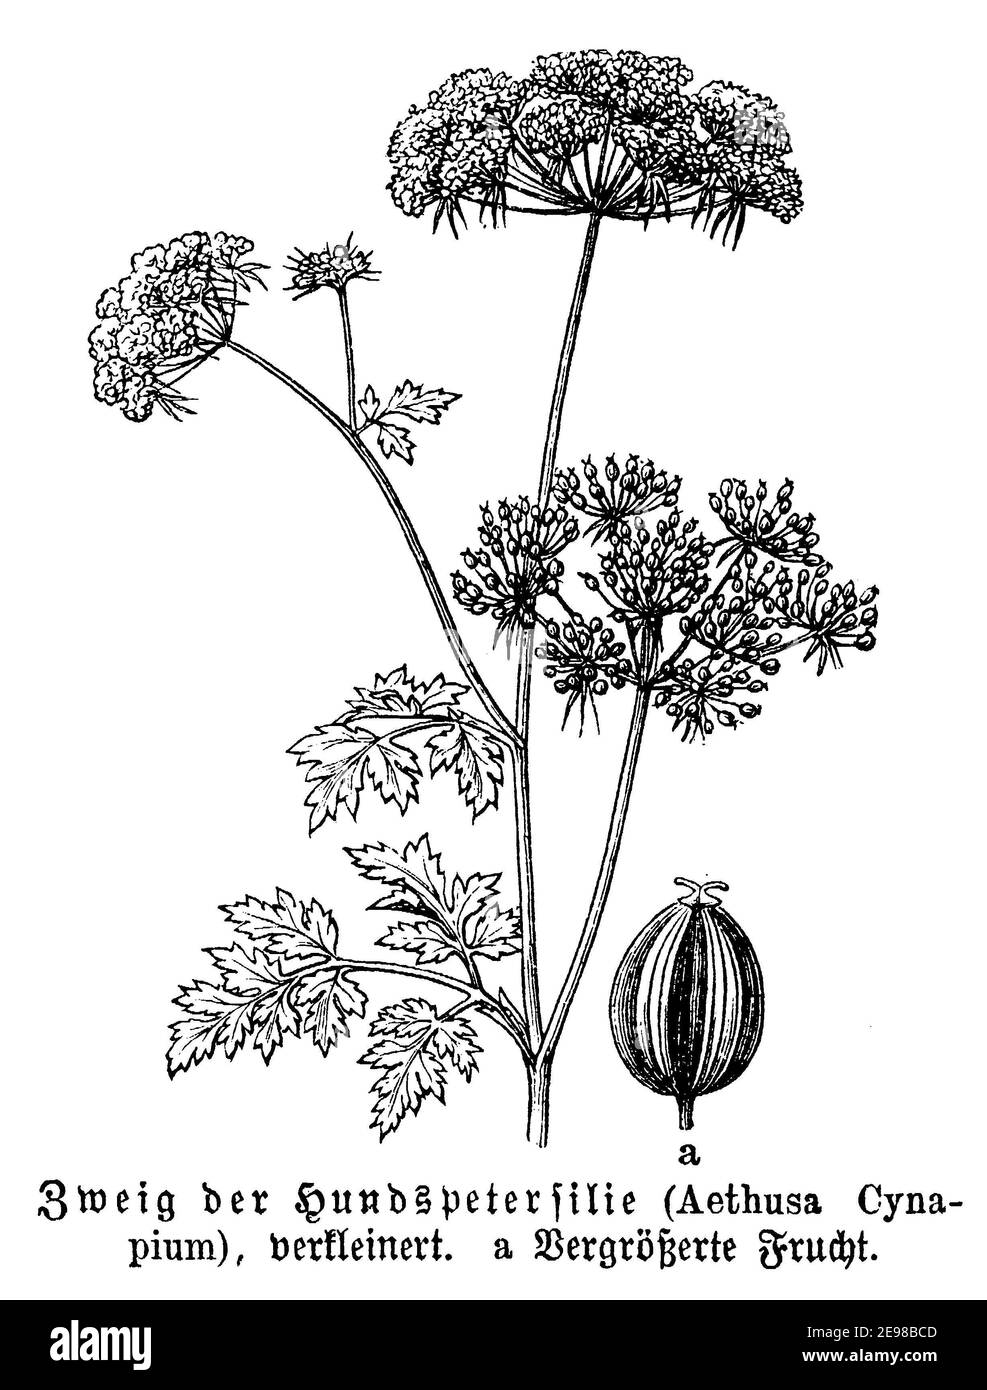 Narr's Petersilie, Narr's cicely, or poison Petersilie / Aethusa cynapium / Hundspetersilie (Biologie Buch, 1889) Stockfoto